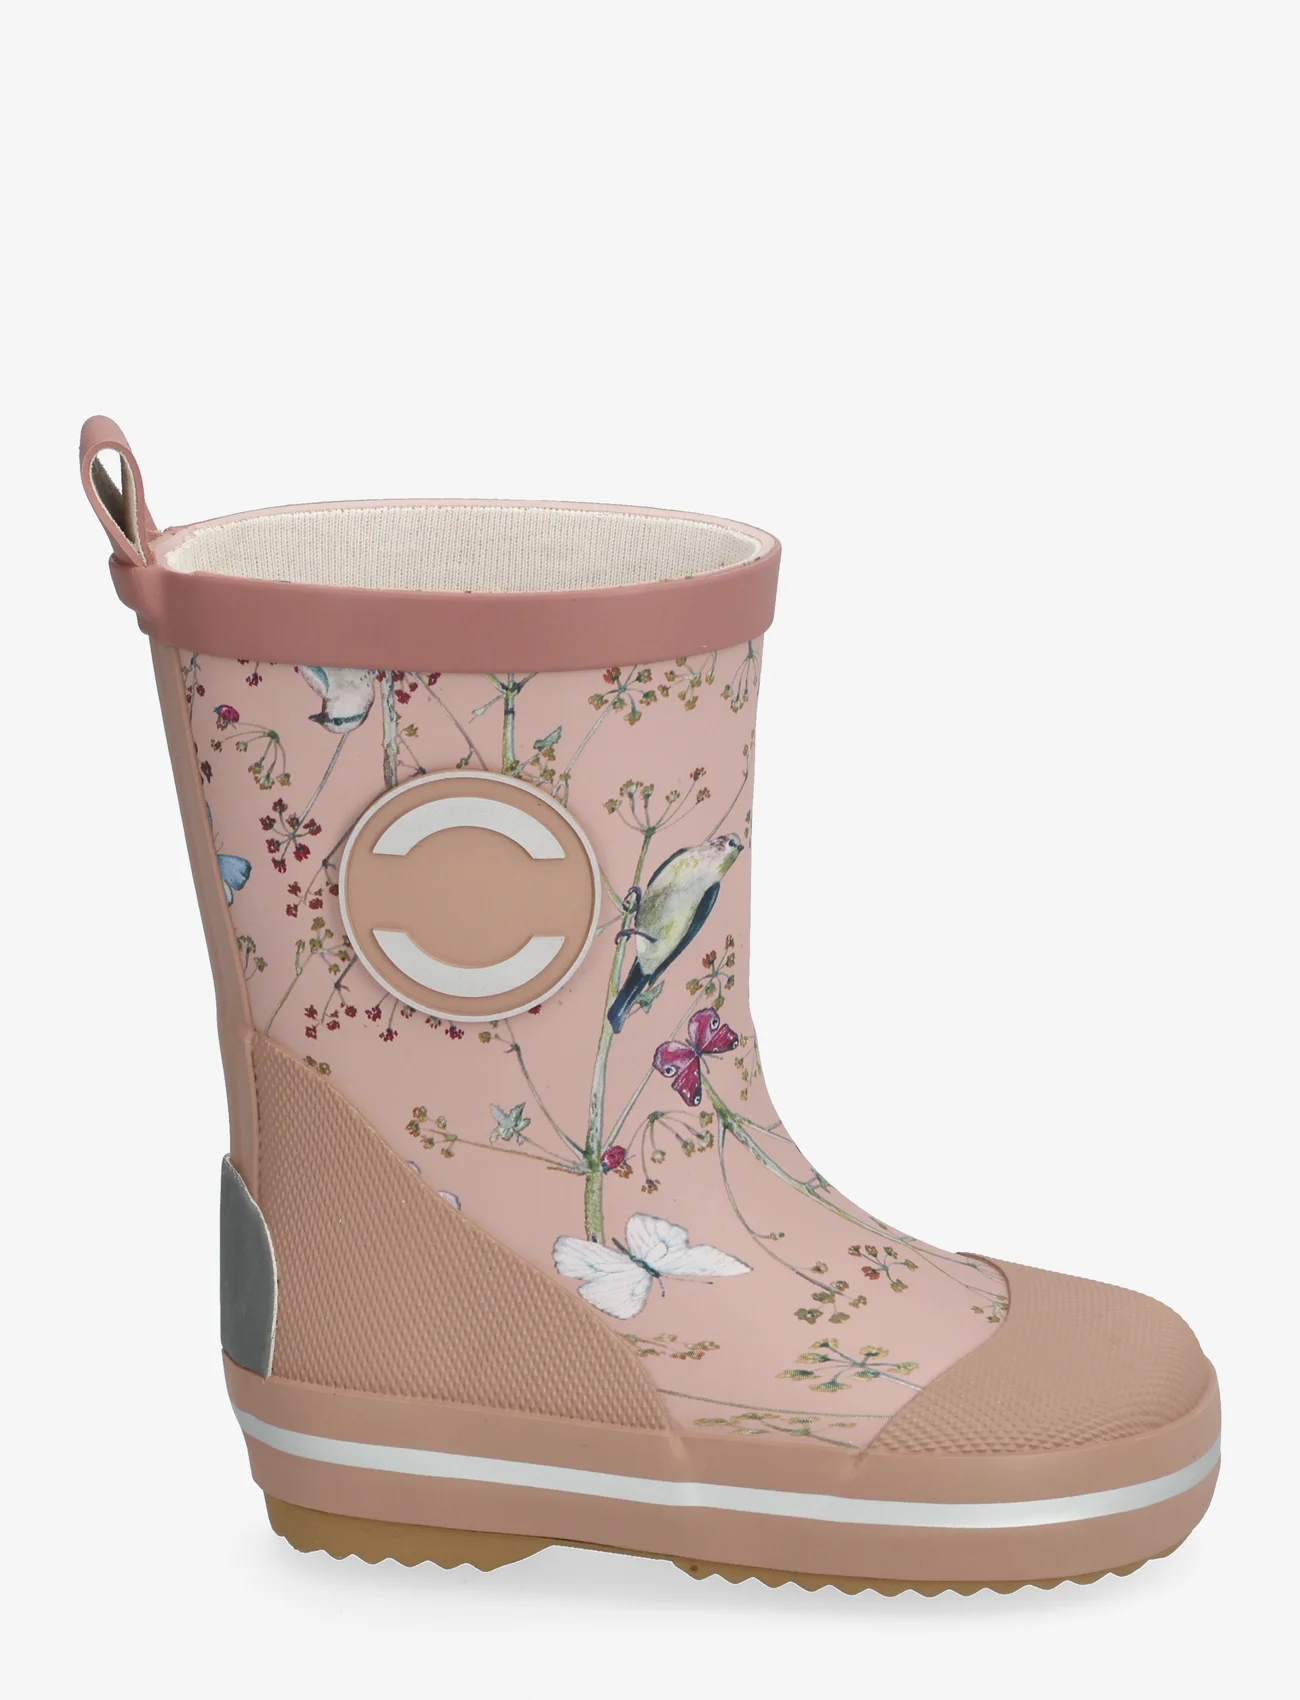 mikk-line - Printed Wellies - unlined rubberboots - warm taupe - 1